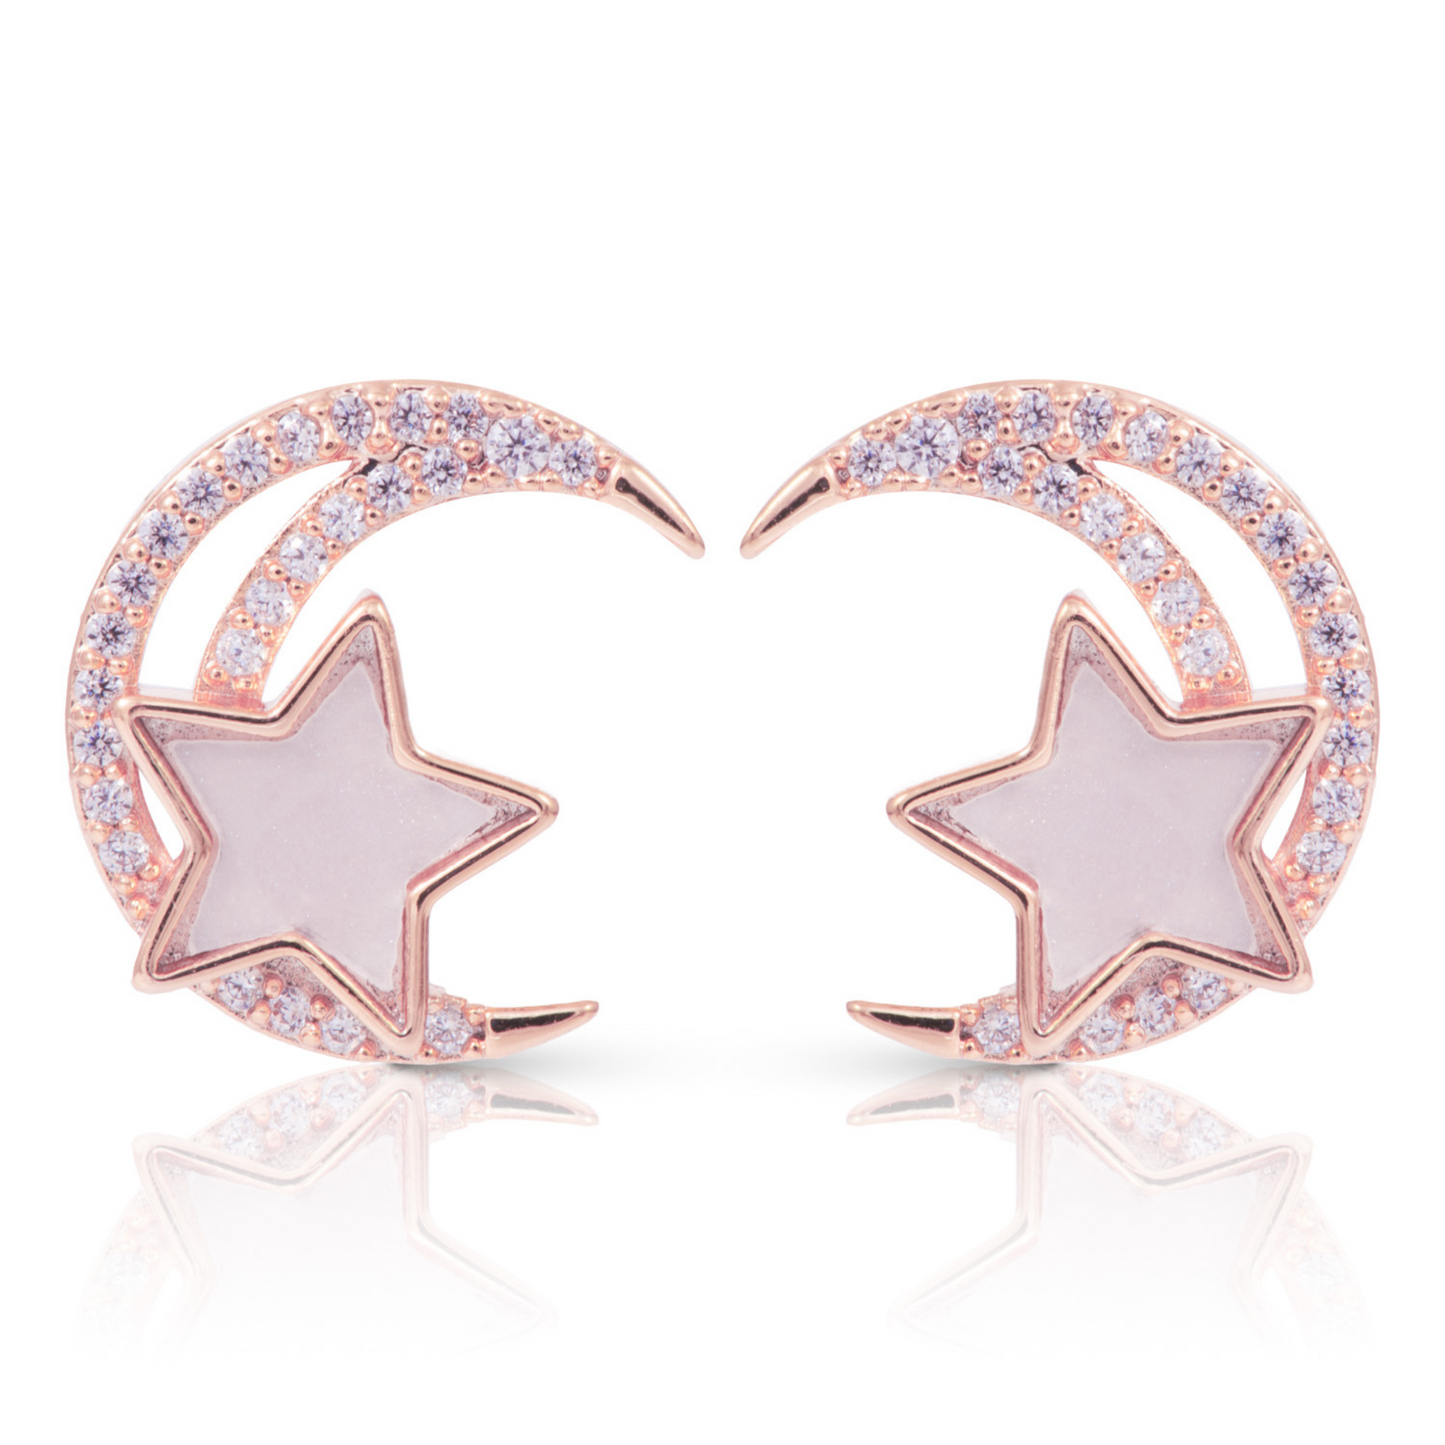 These elegant Half Moon and Star Earrings feature a delicate half moon and star design with sparkling rhinestone accents. Crafted in rose gold and secured with stud backs, these earrings are perfect for adding a touch of celestial beauty to any outfit.